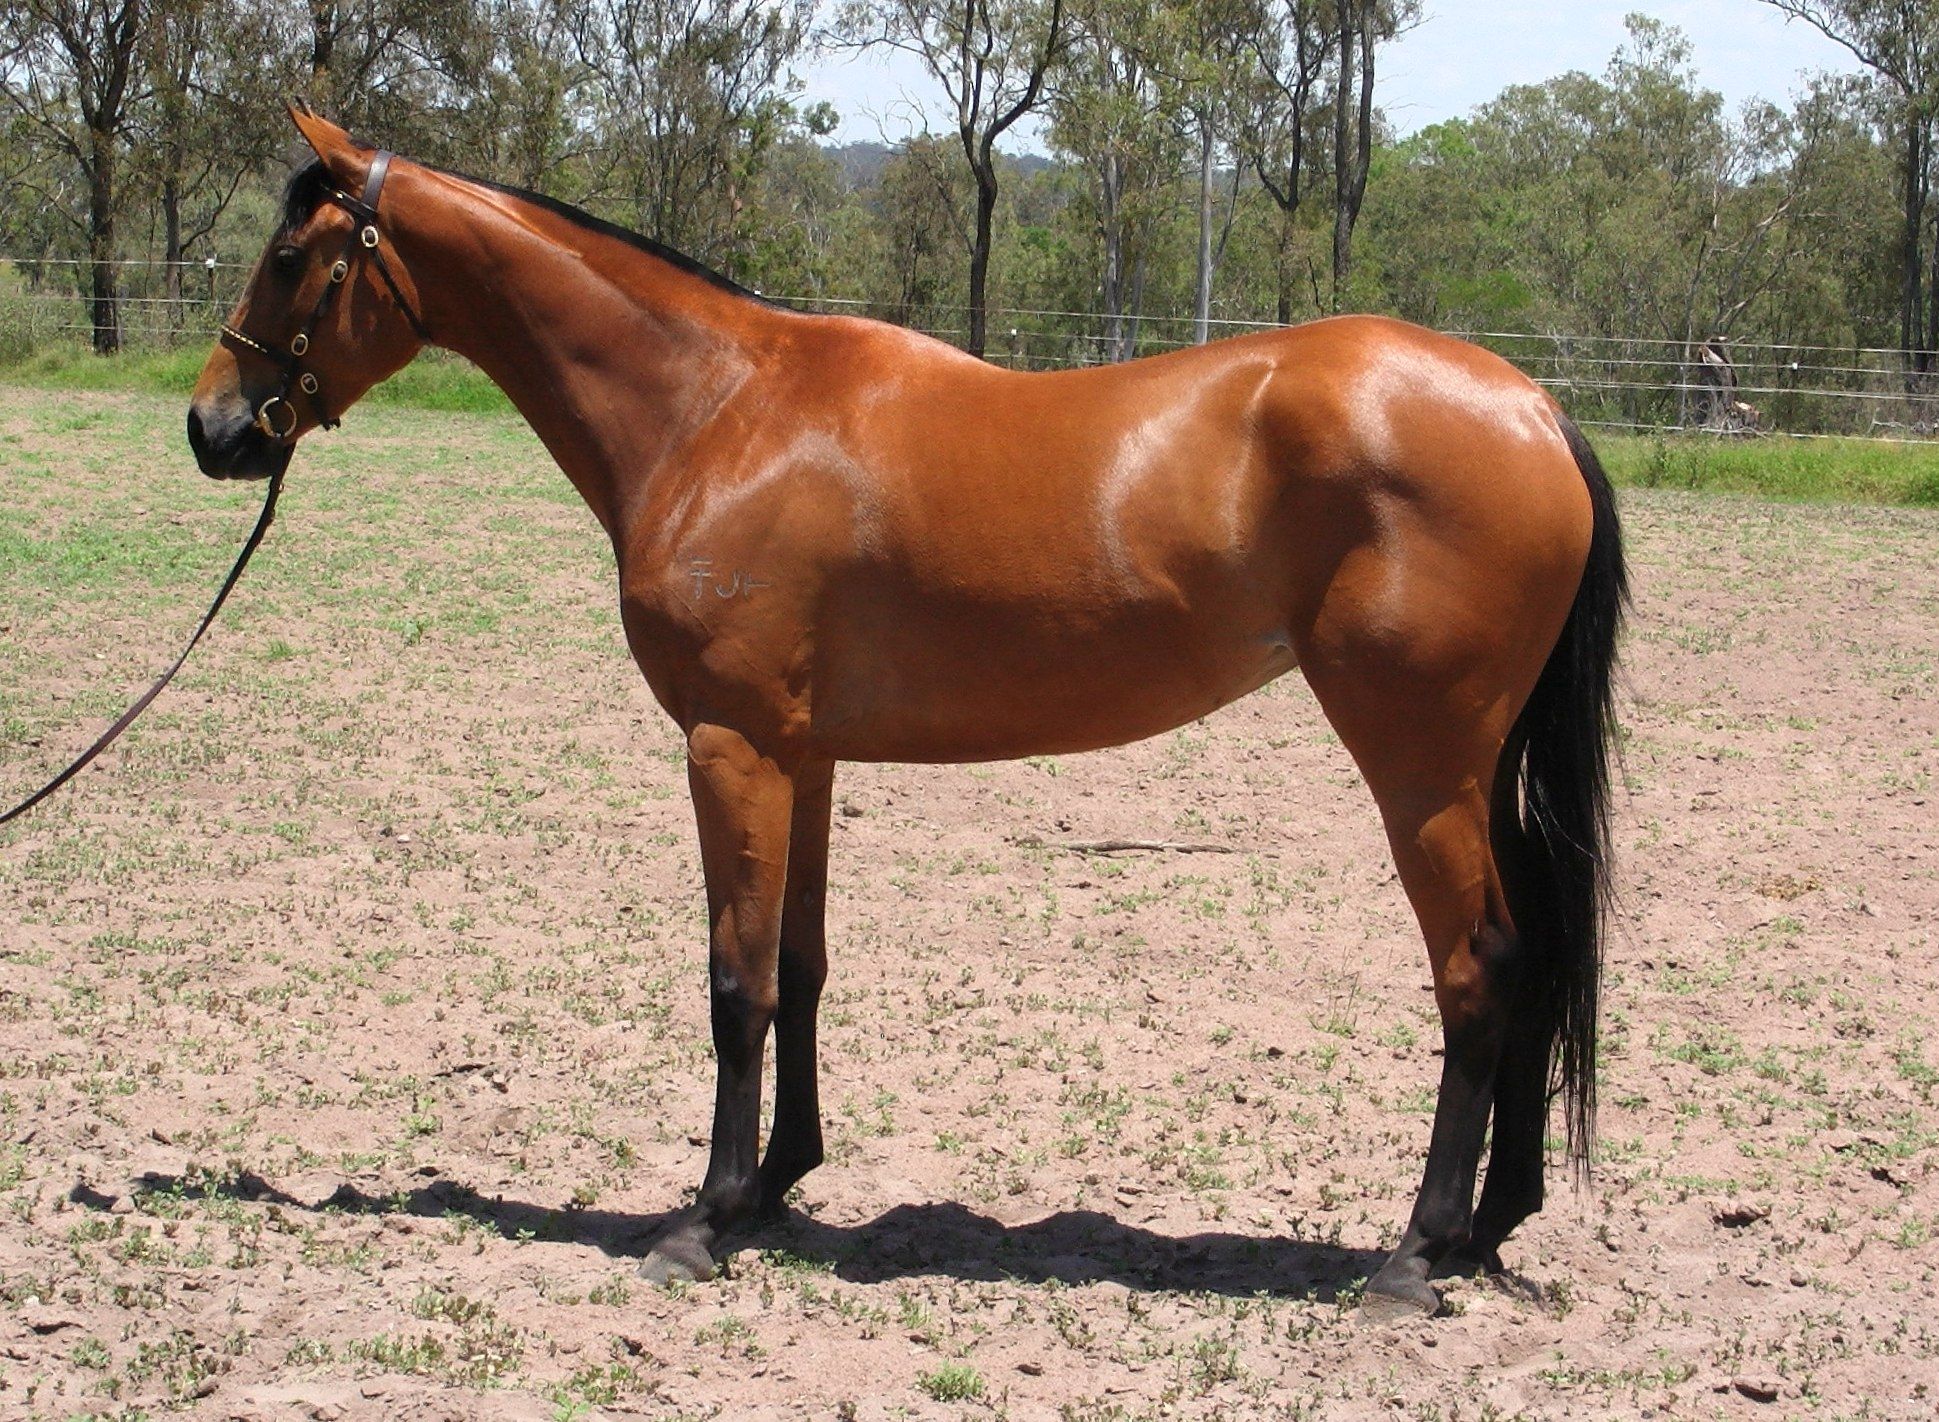 The Australian Stock Horse comes in all coat colors, and typically